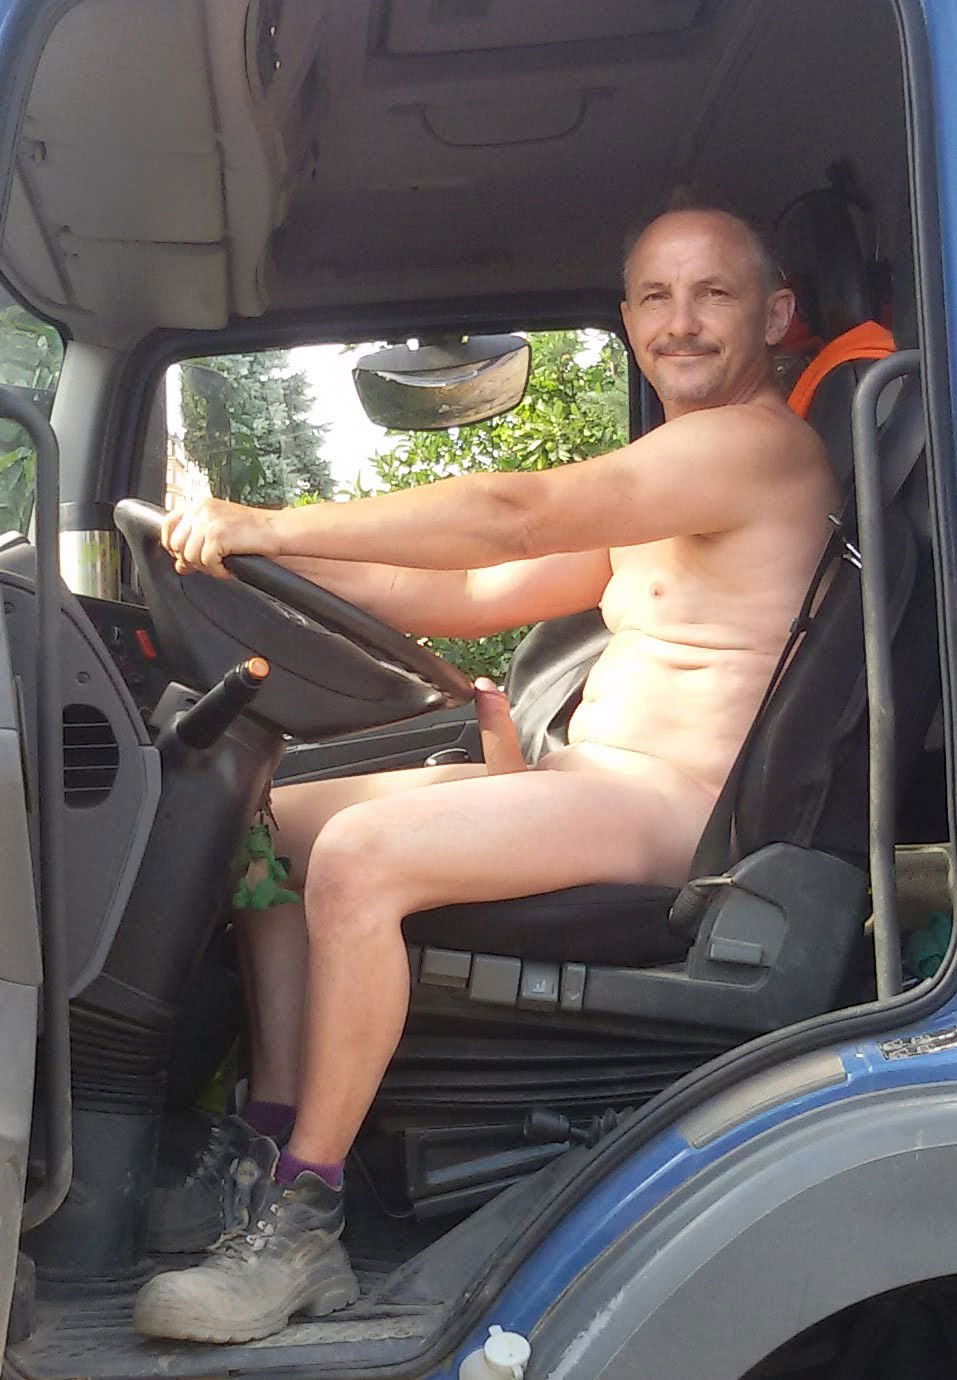 Photo by Lommi with the username @Lommi, who is a verified user,  May 29, 2019 at 7:43 PM. The post is about the topic Nackedeis Reblogs and the text says 'Outdoor men'